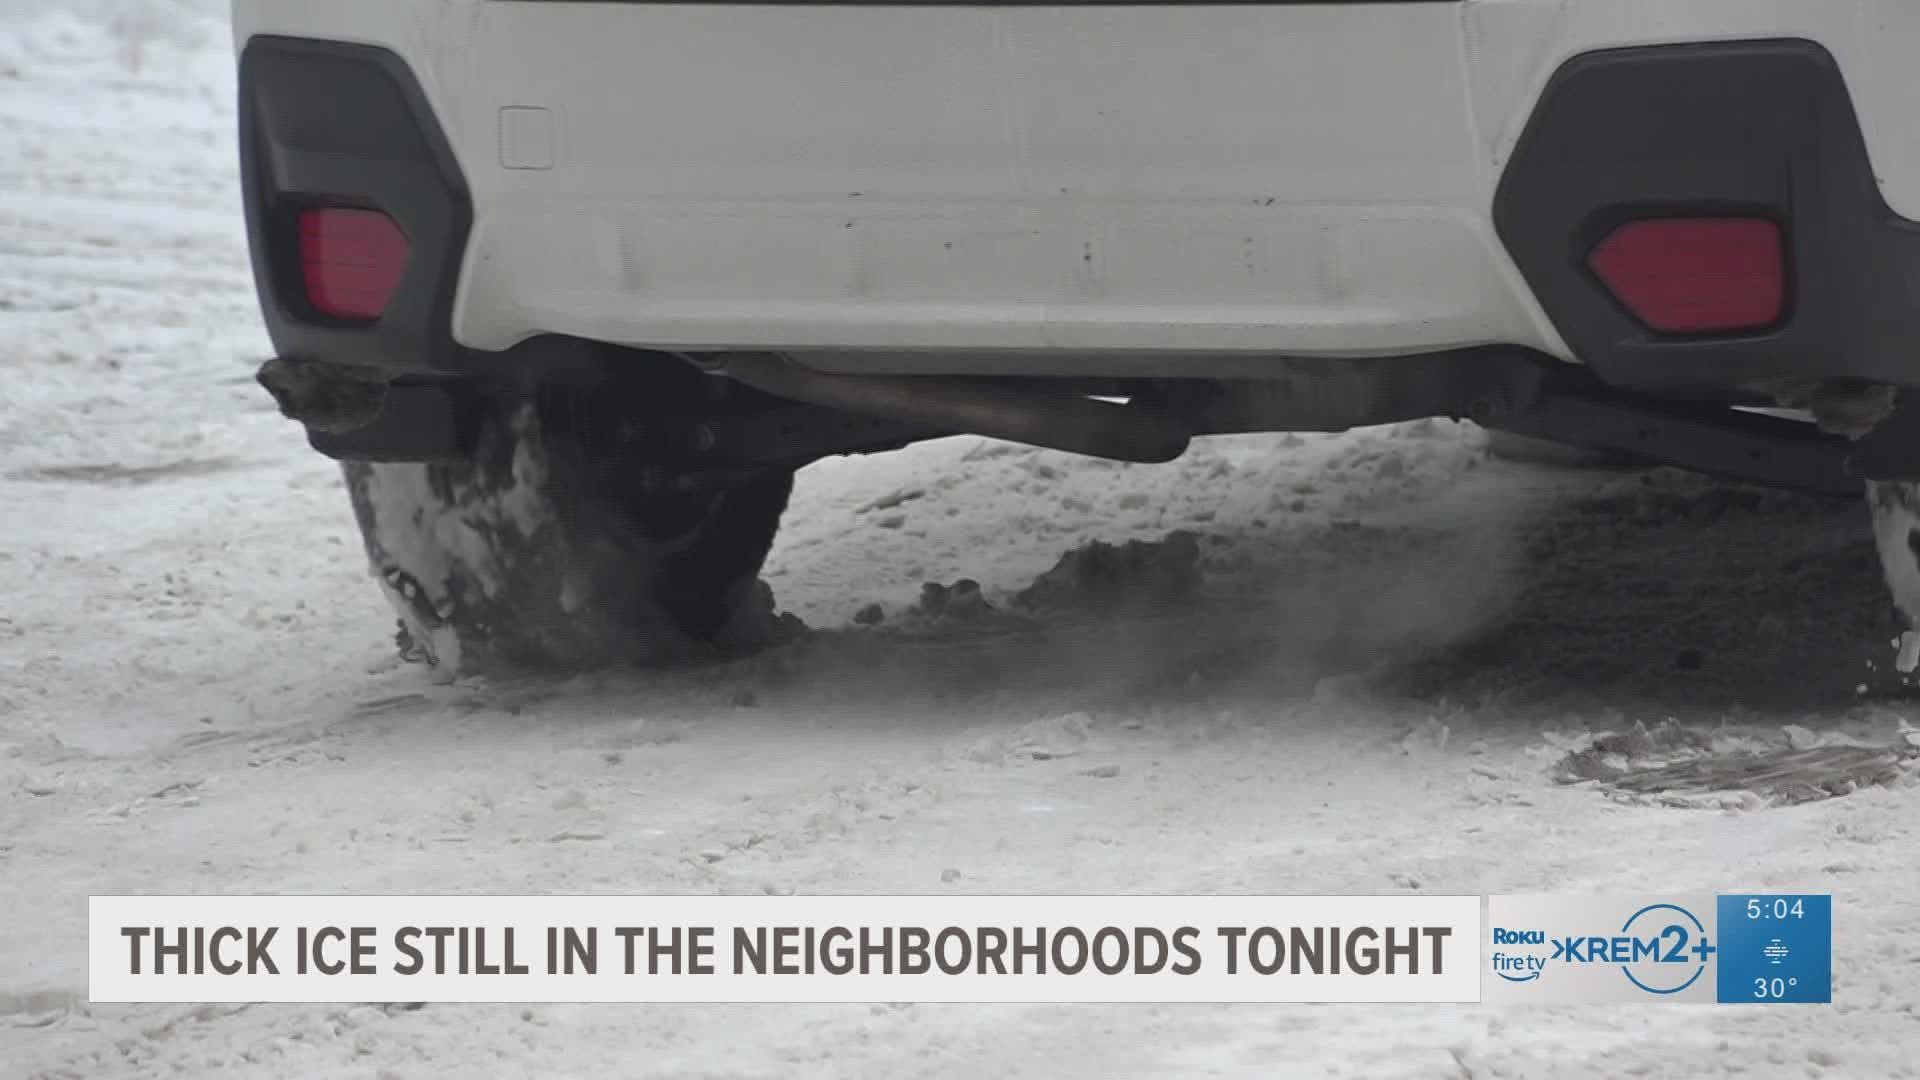 Plenty of Spokane citizens are concerned after the roads have still not been plowed sufficiently.